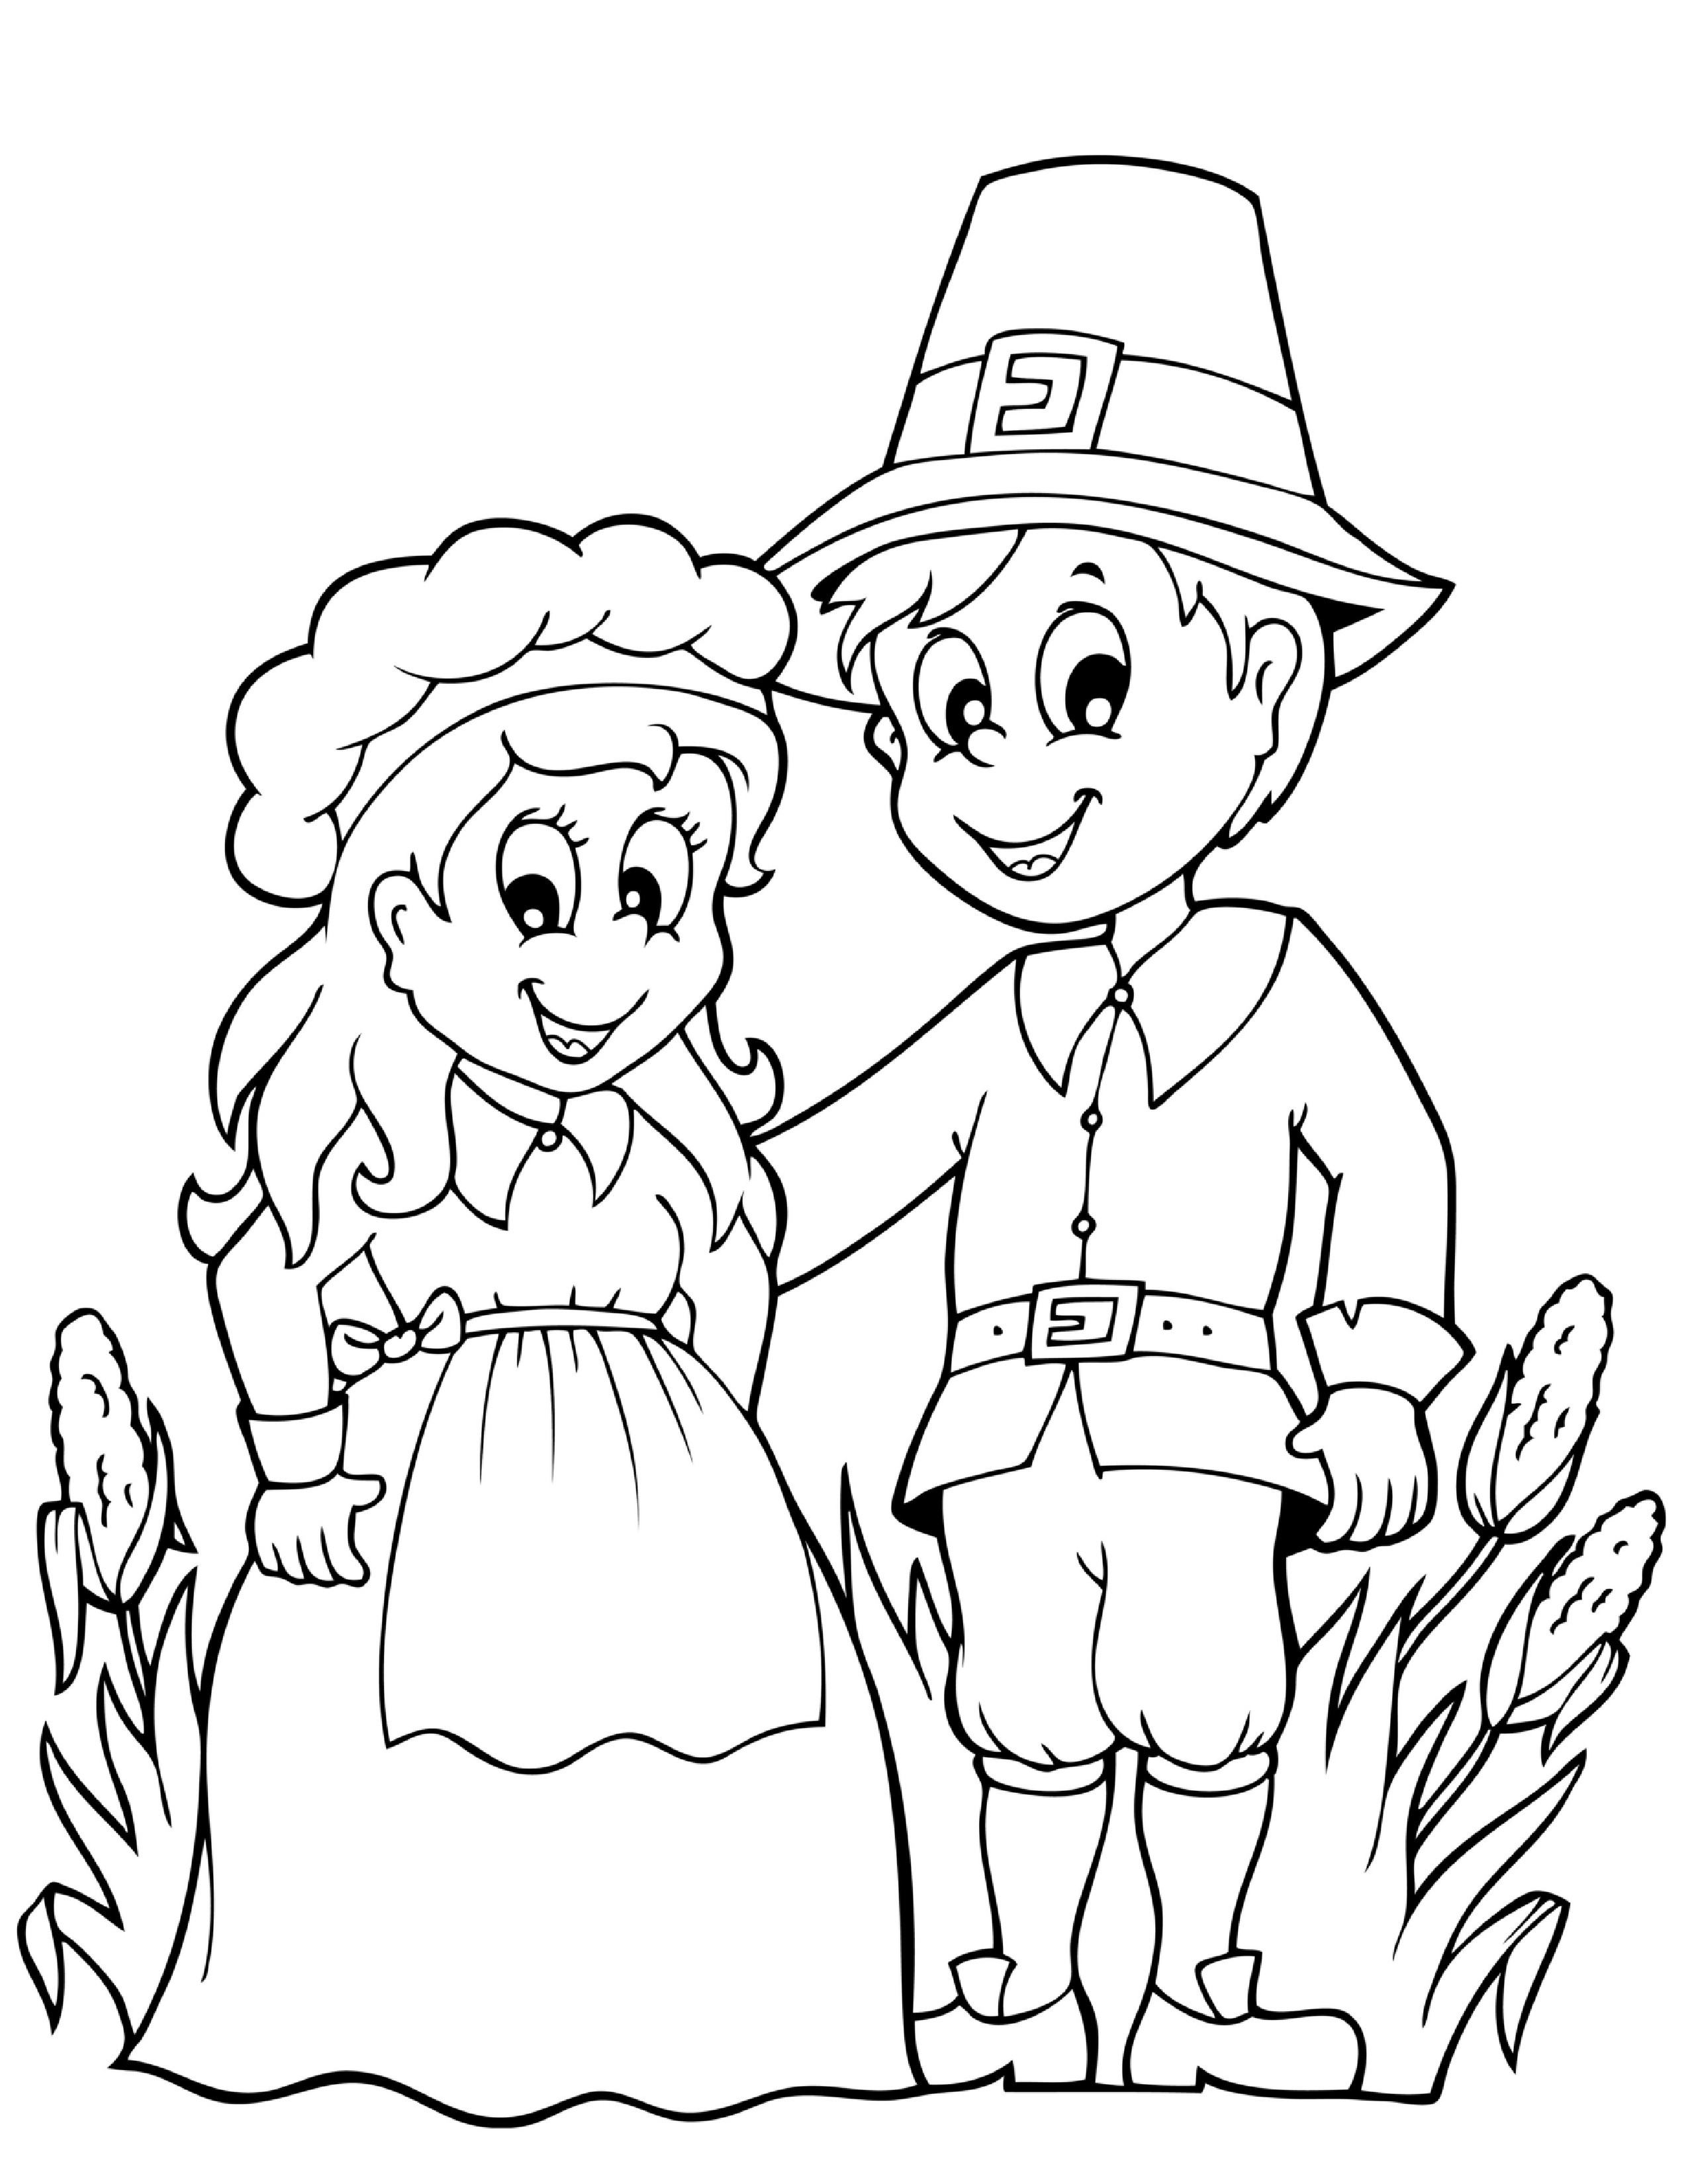 Pilgrim Indian Coloring Pages Collection Thanksgiving Indian Coloring Pages Pictures